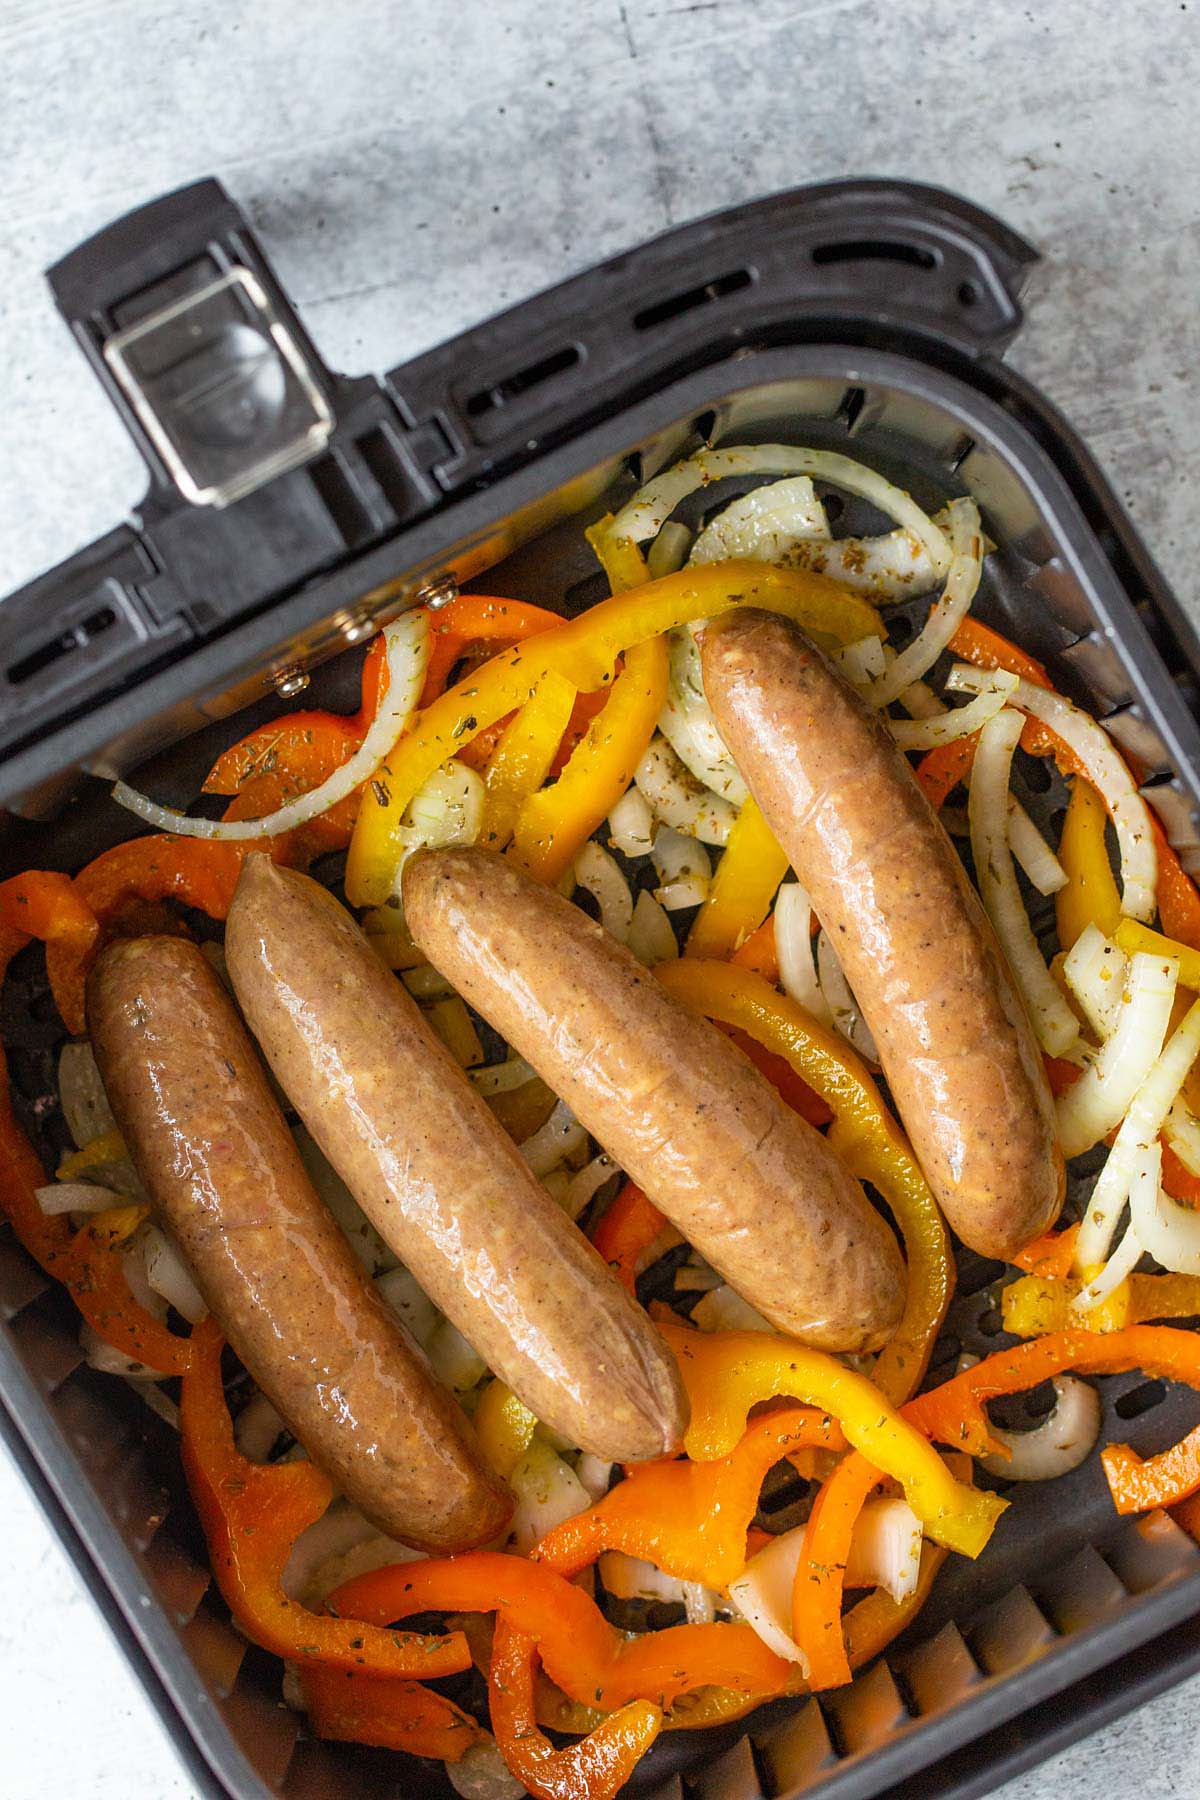 Sausage and peppers in air fryer basket.